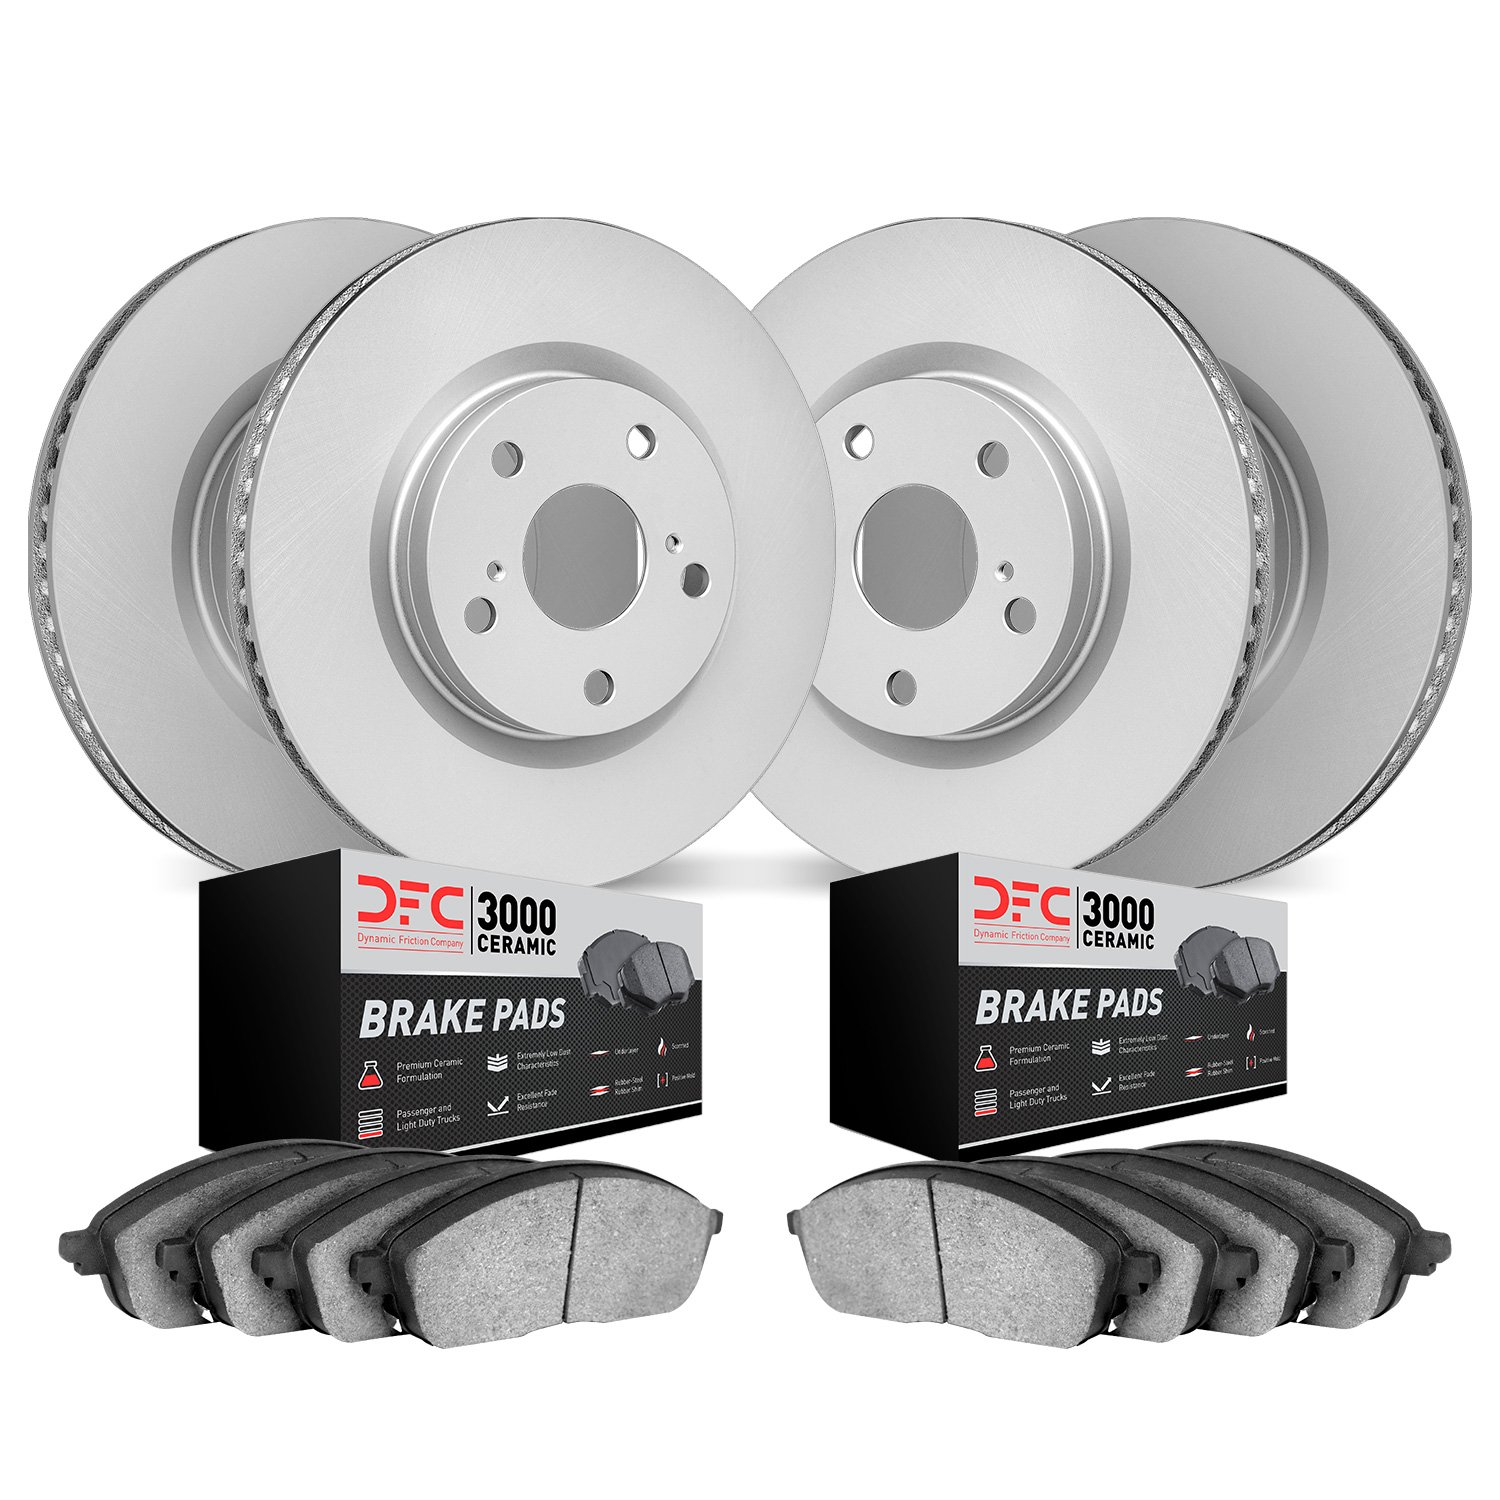 4304-68006 Geospec Brake Rotors with 3000-Series Ceramic Brake Pads Kit, Fits Select Infiniti/Nissan, Position: Front and Rear